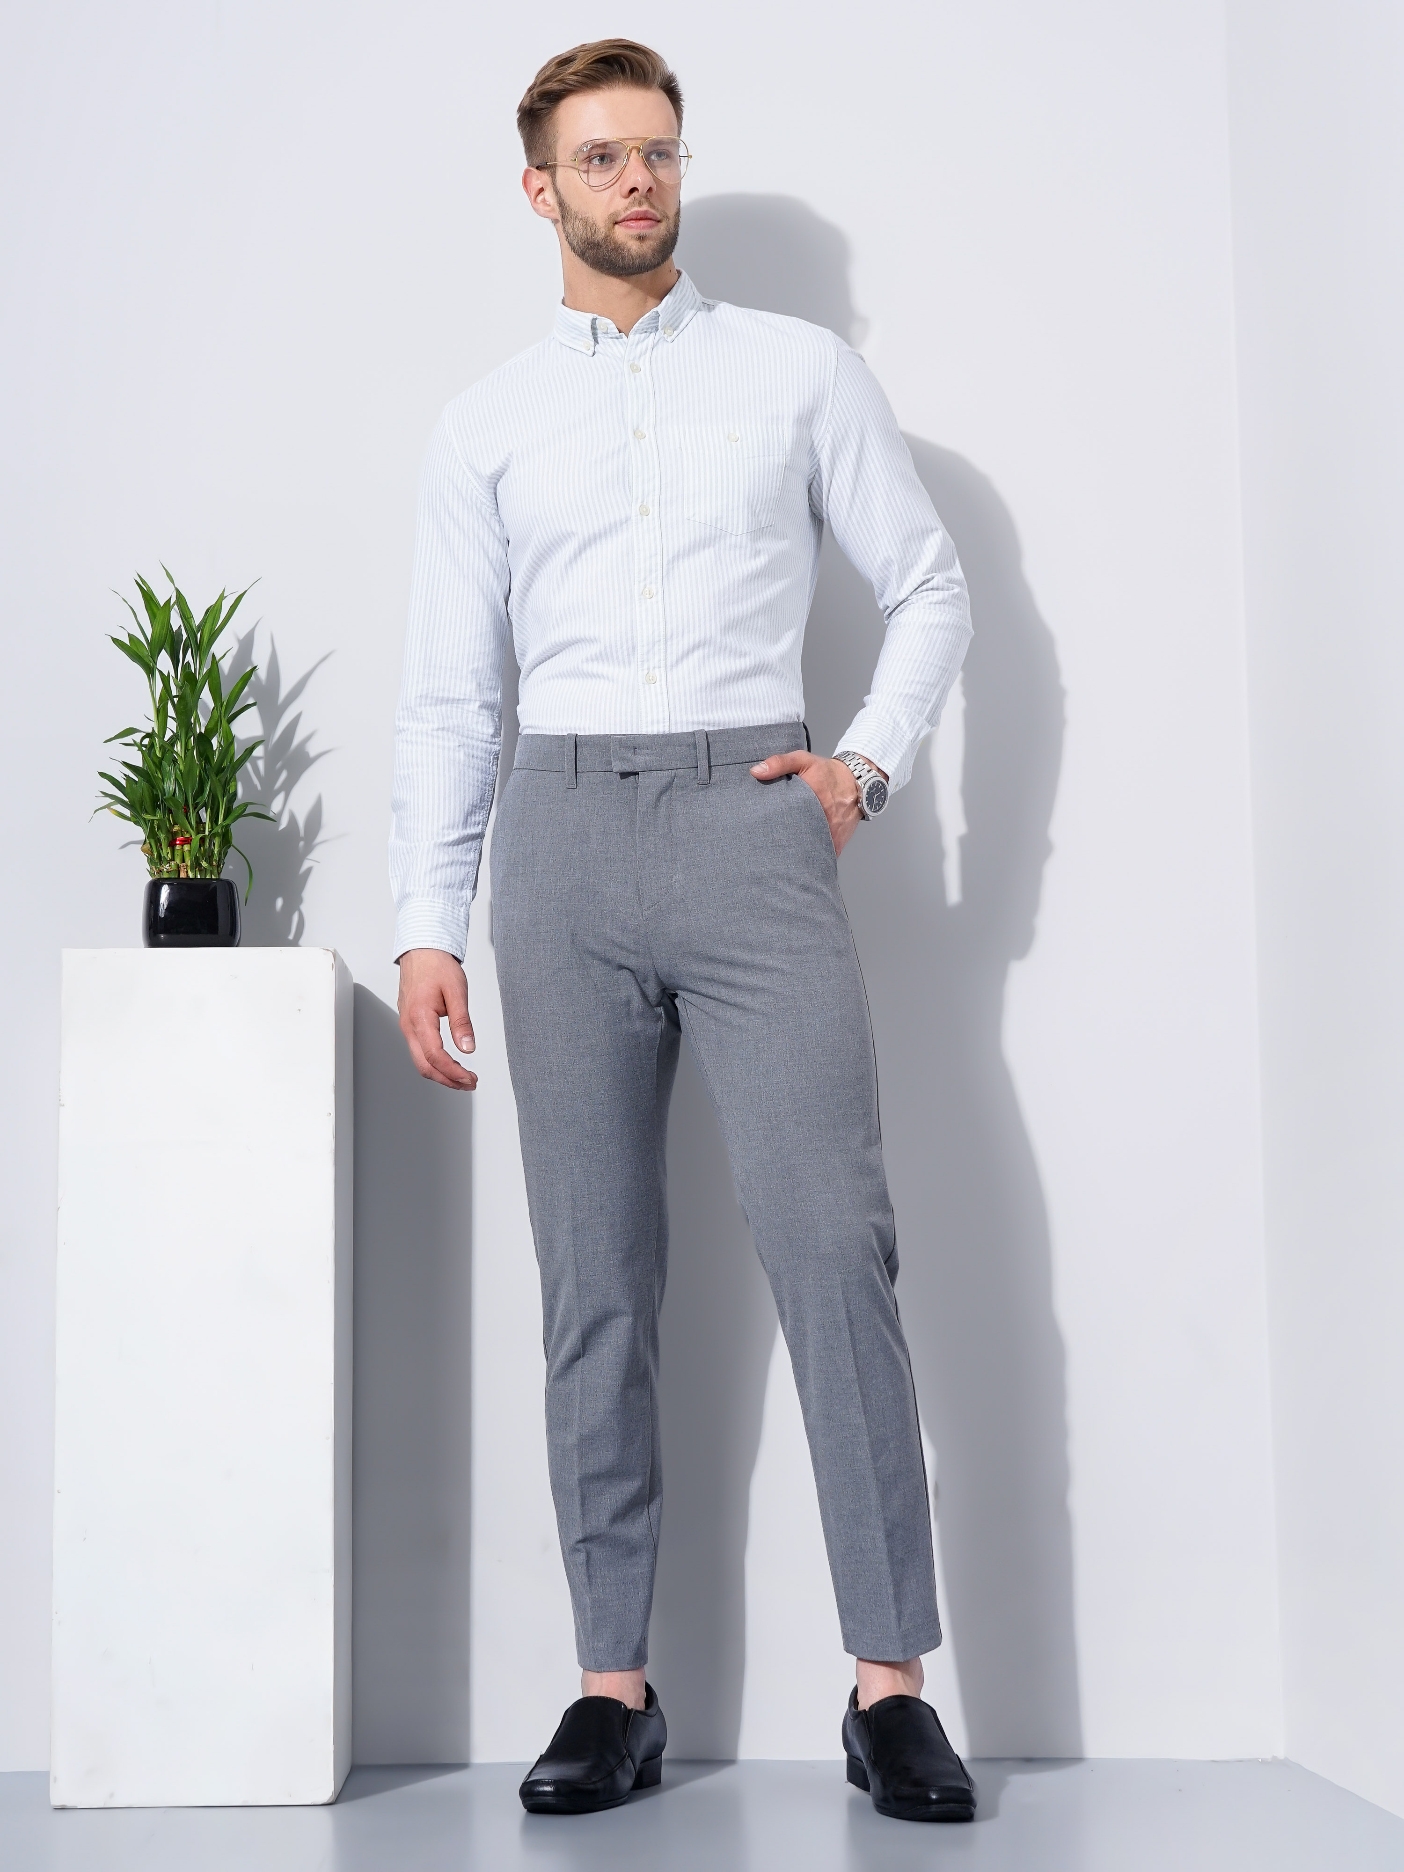 Men's Grey Polyester Handwoven Trousers